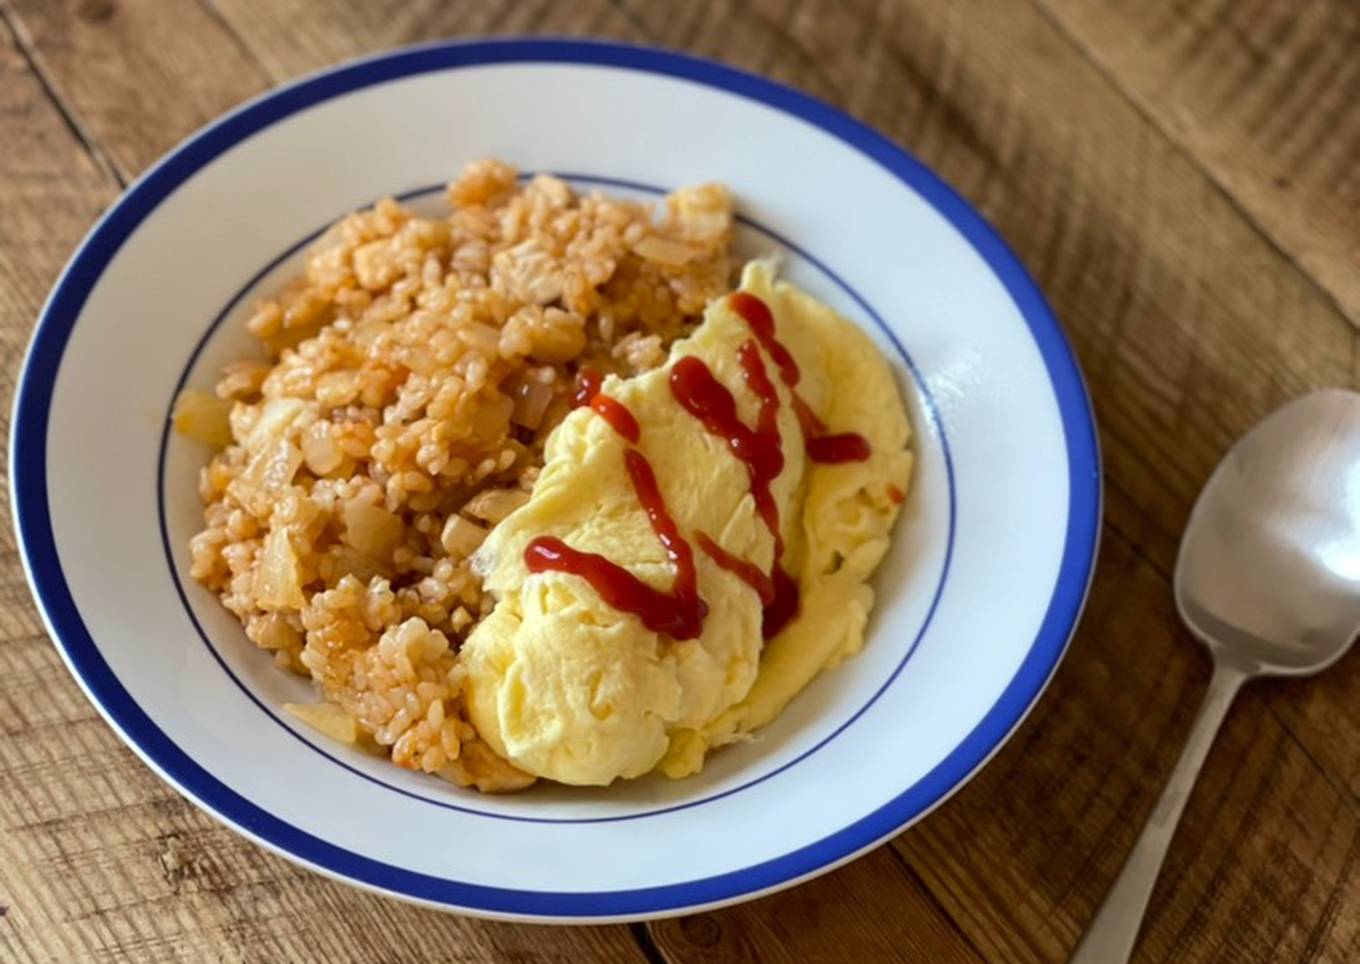 chicken omurice the old classic japanese comfort meal chicken kitchup rice with omlette